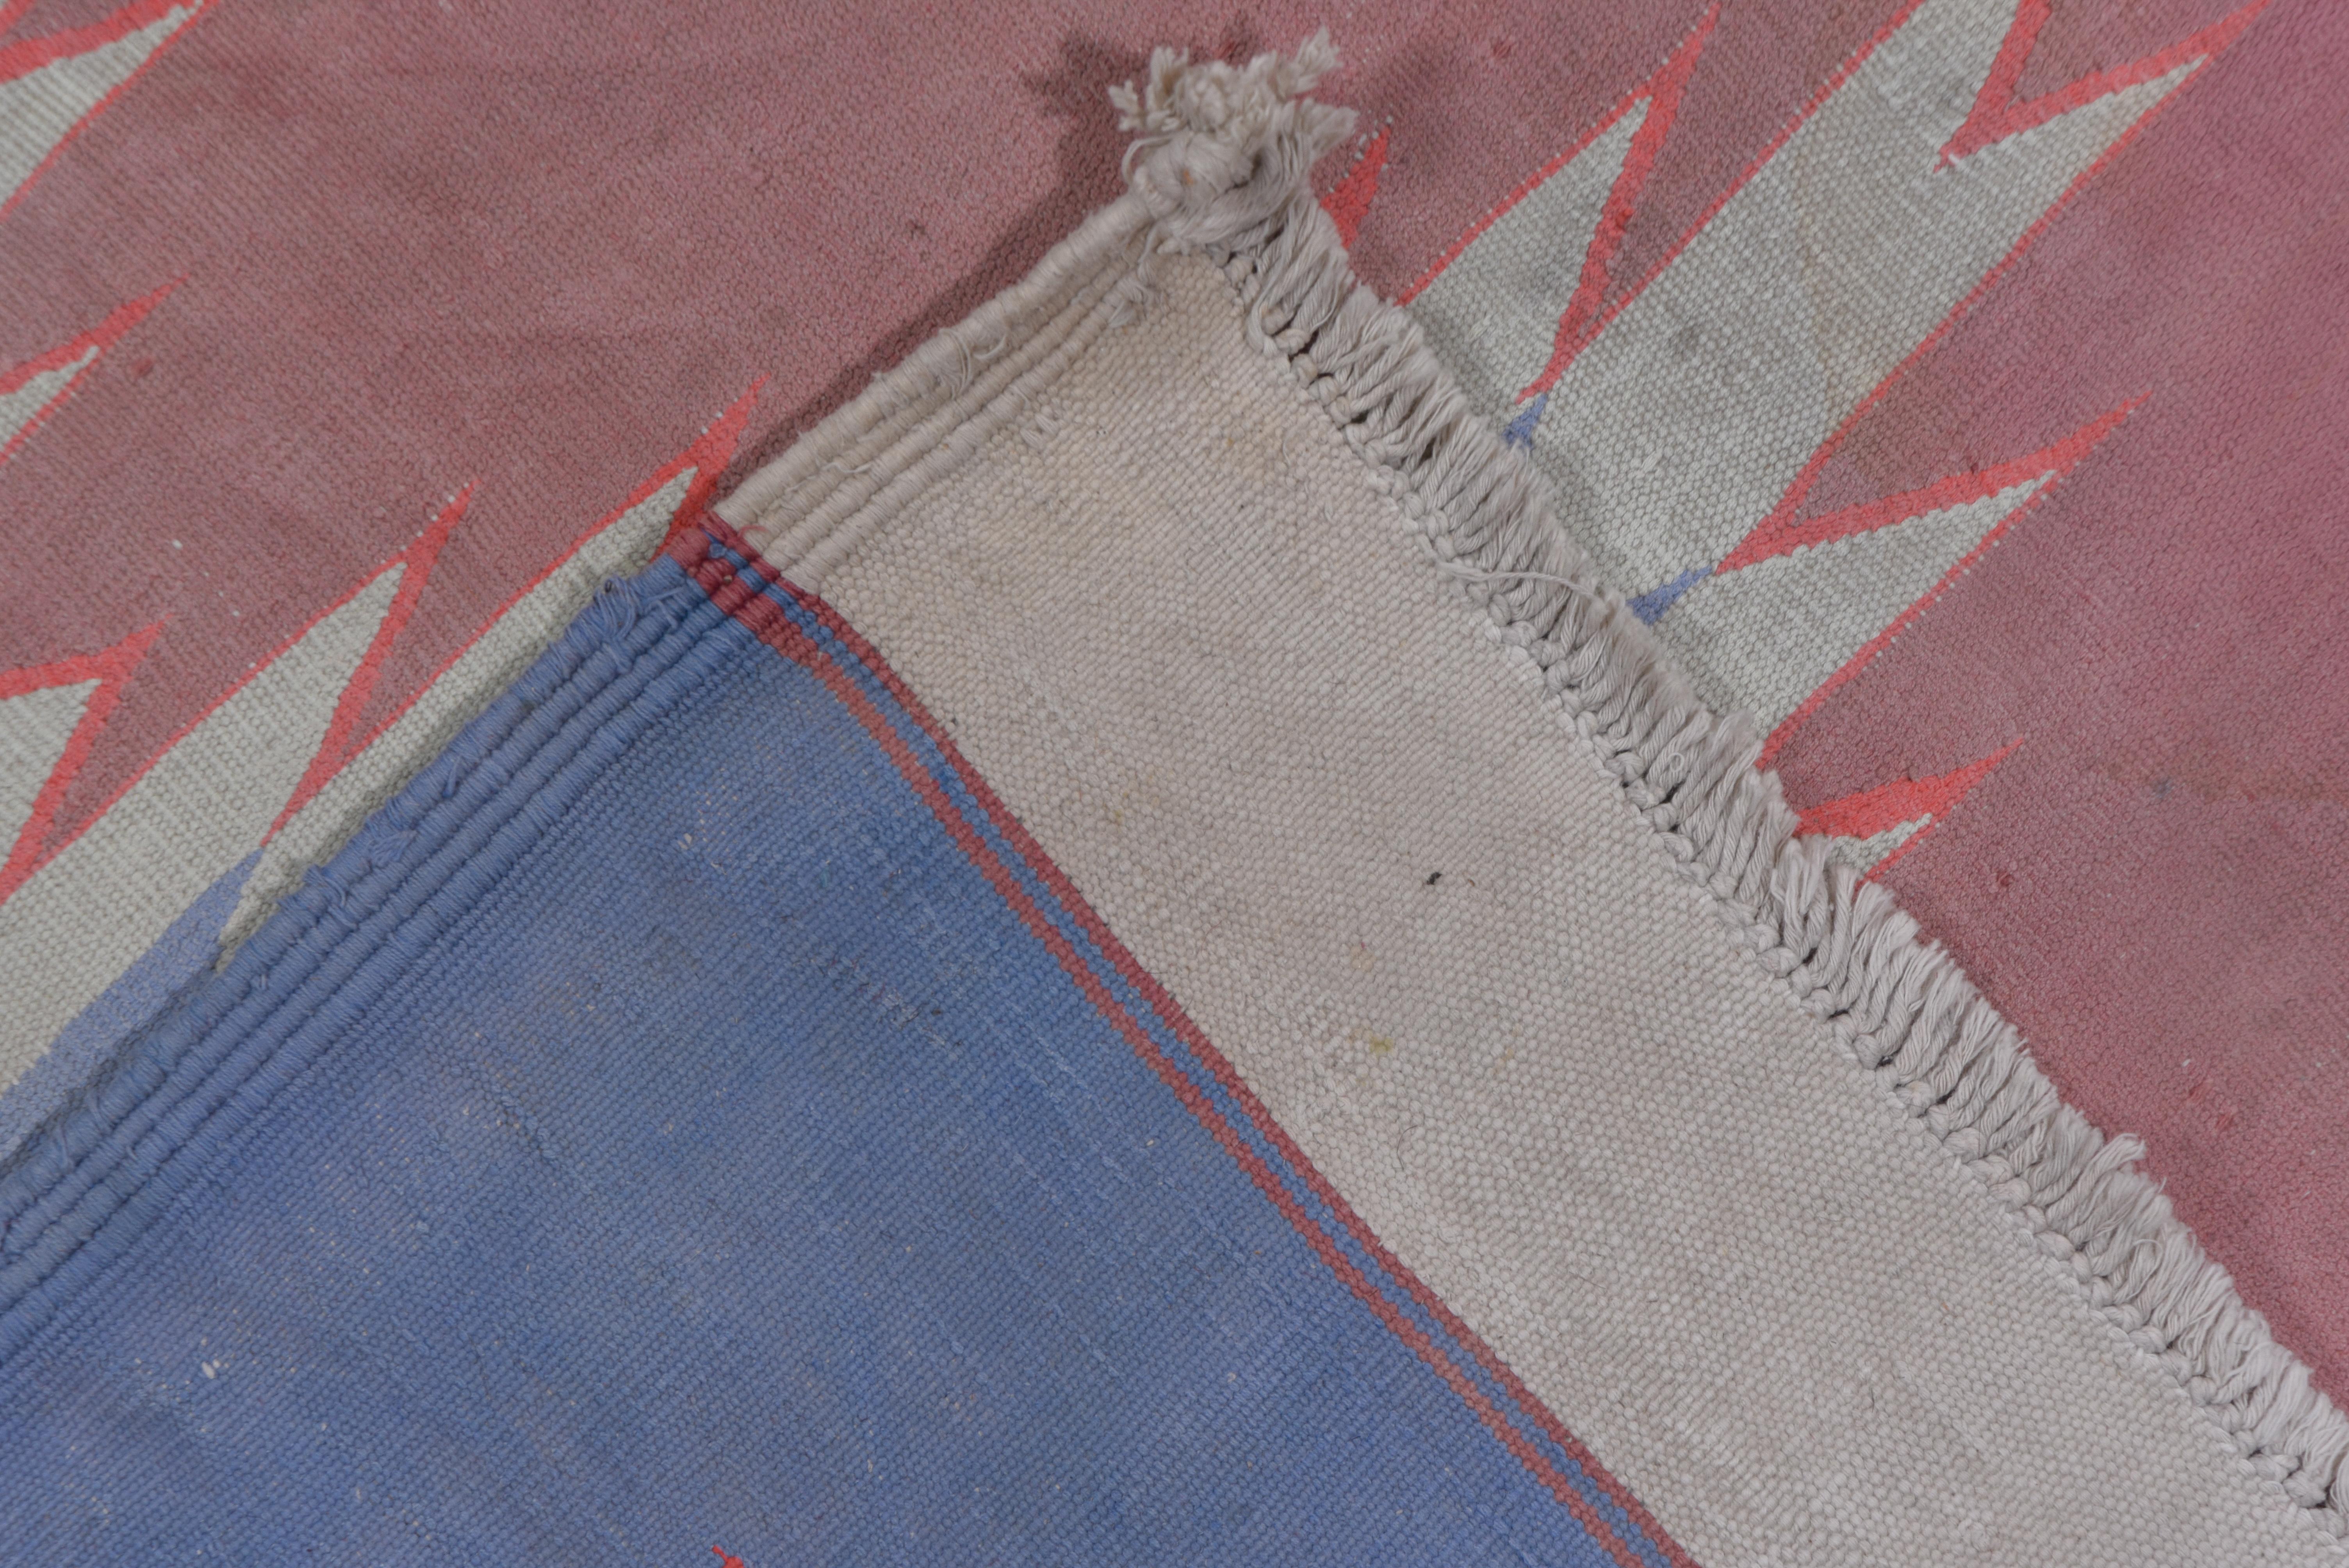 Two columns of plain coral flattened ashiks decorate the gray field with smaller blue ashiks between. Sharply serrated mid-blue border with irregularities on one side. All-cotton construction. Wide white plain weave end strips beyond the border.